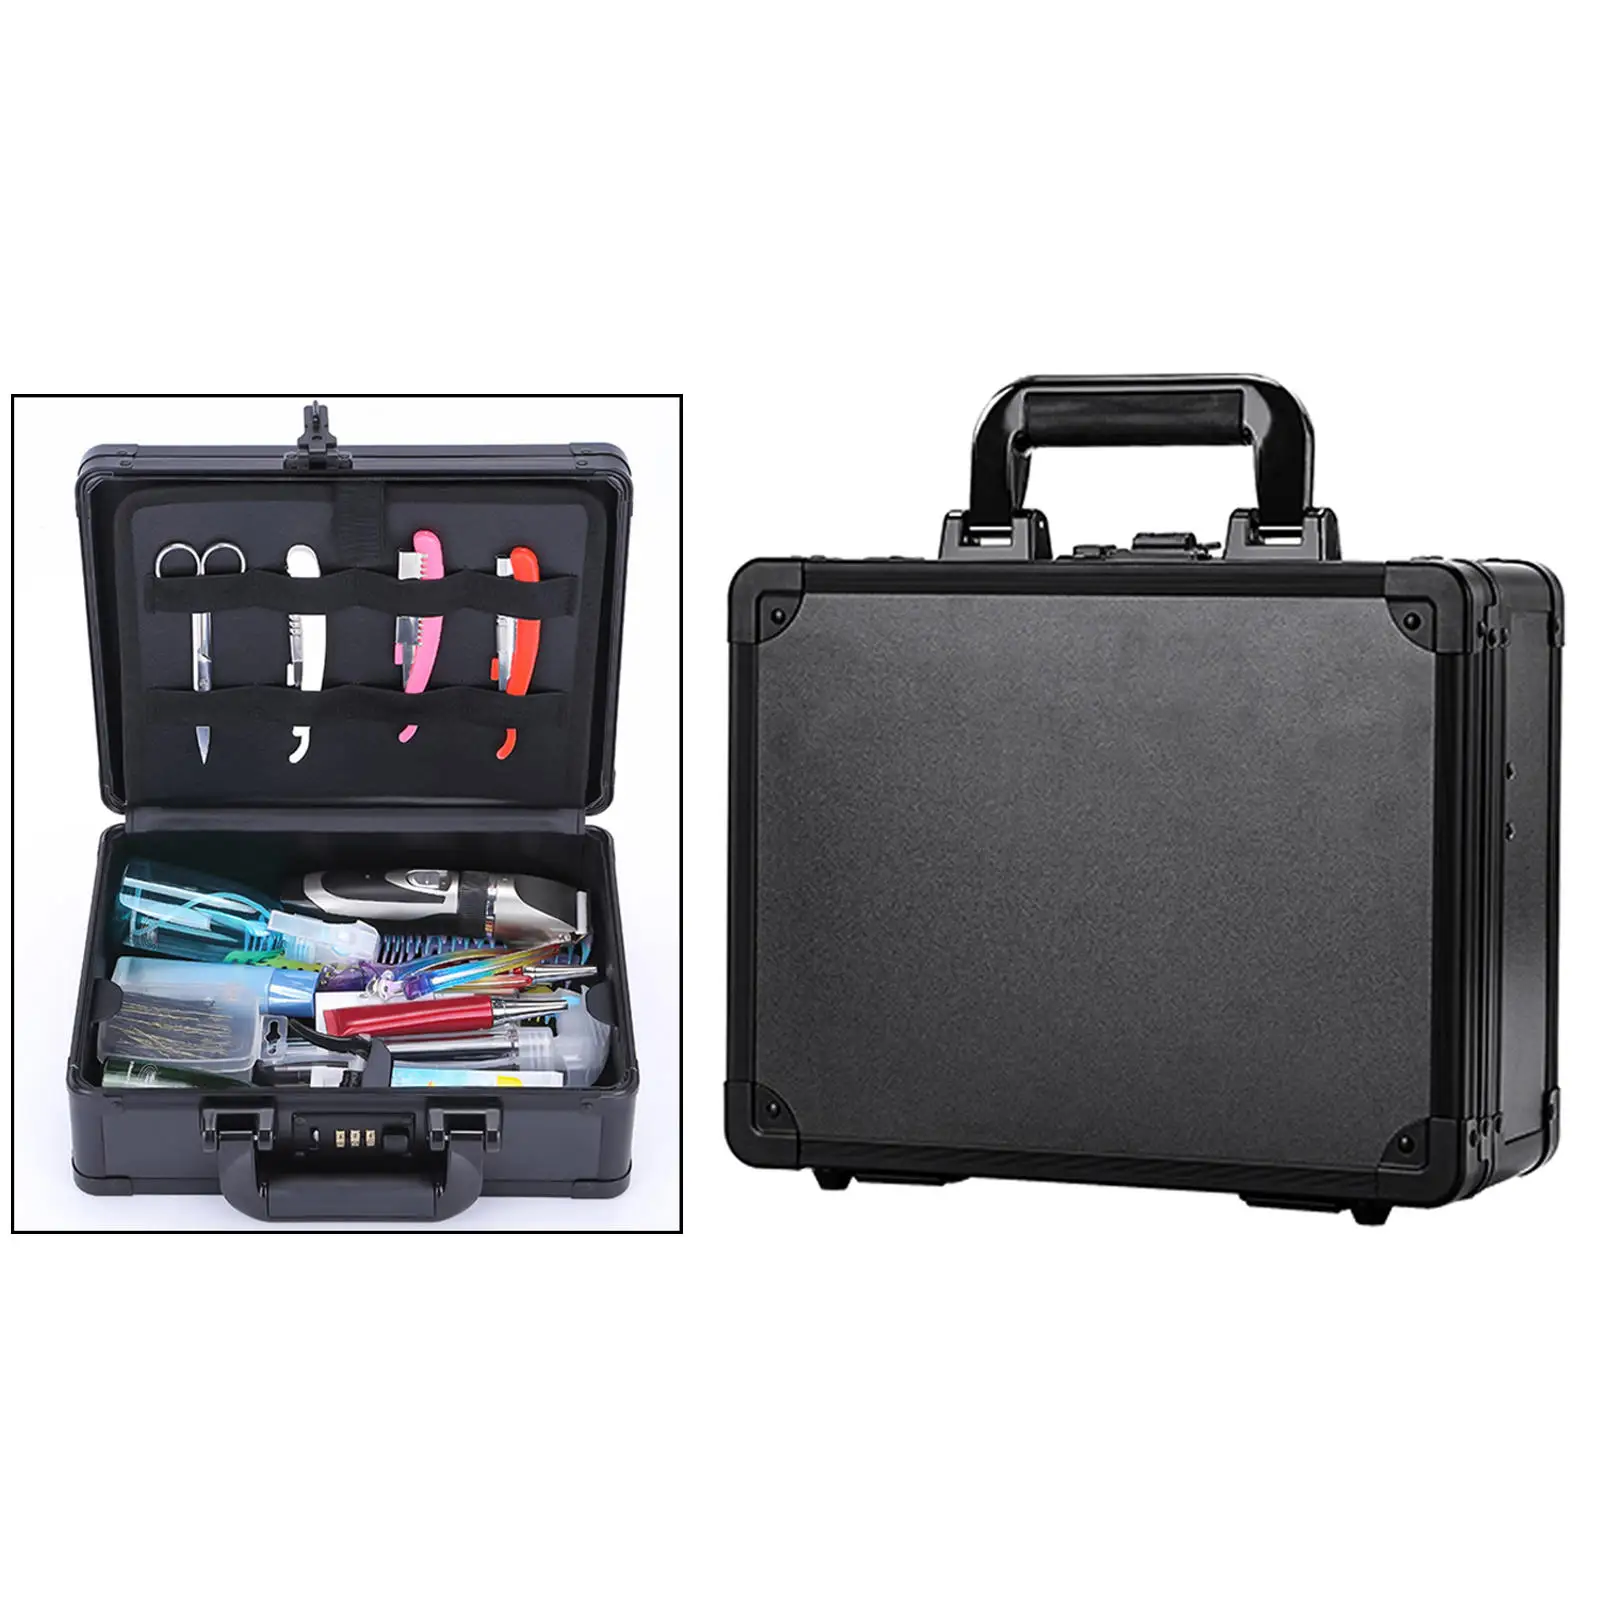 Barber Case Portable with Code Lock Hair Stylist Box/ for Shaver Cutting Grooming Storage